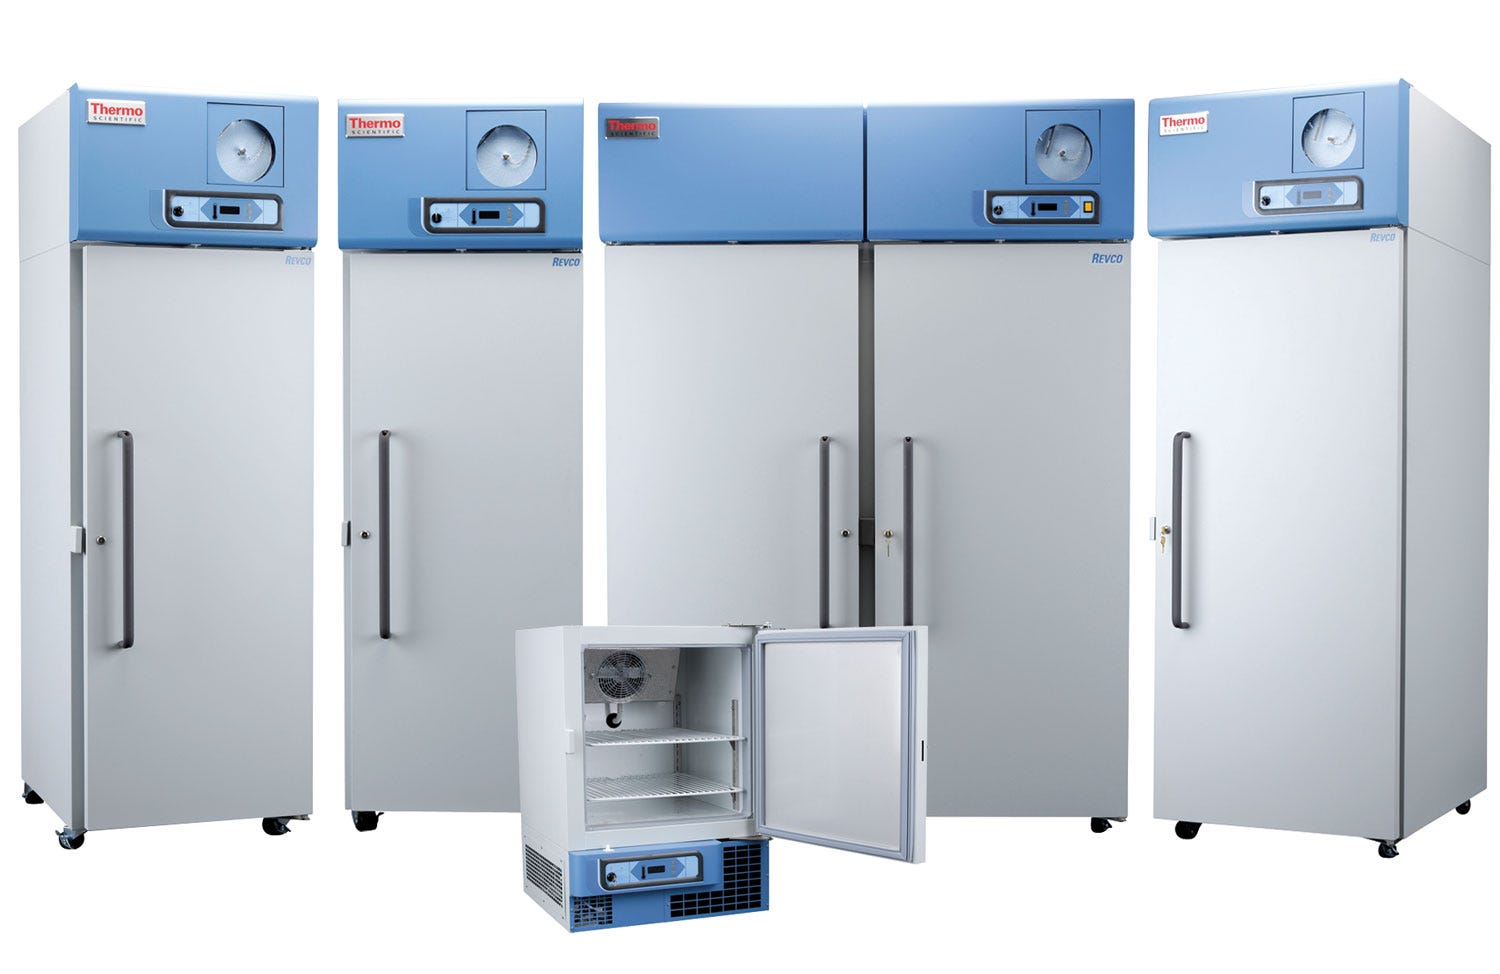 Complete line of Revco Plasma Freezers by Thermo Fisher Scientific for Regulated Labs